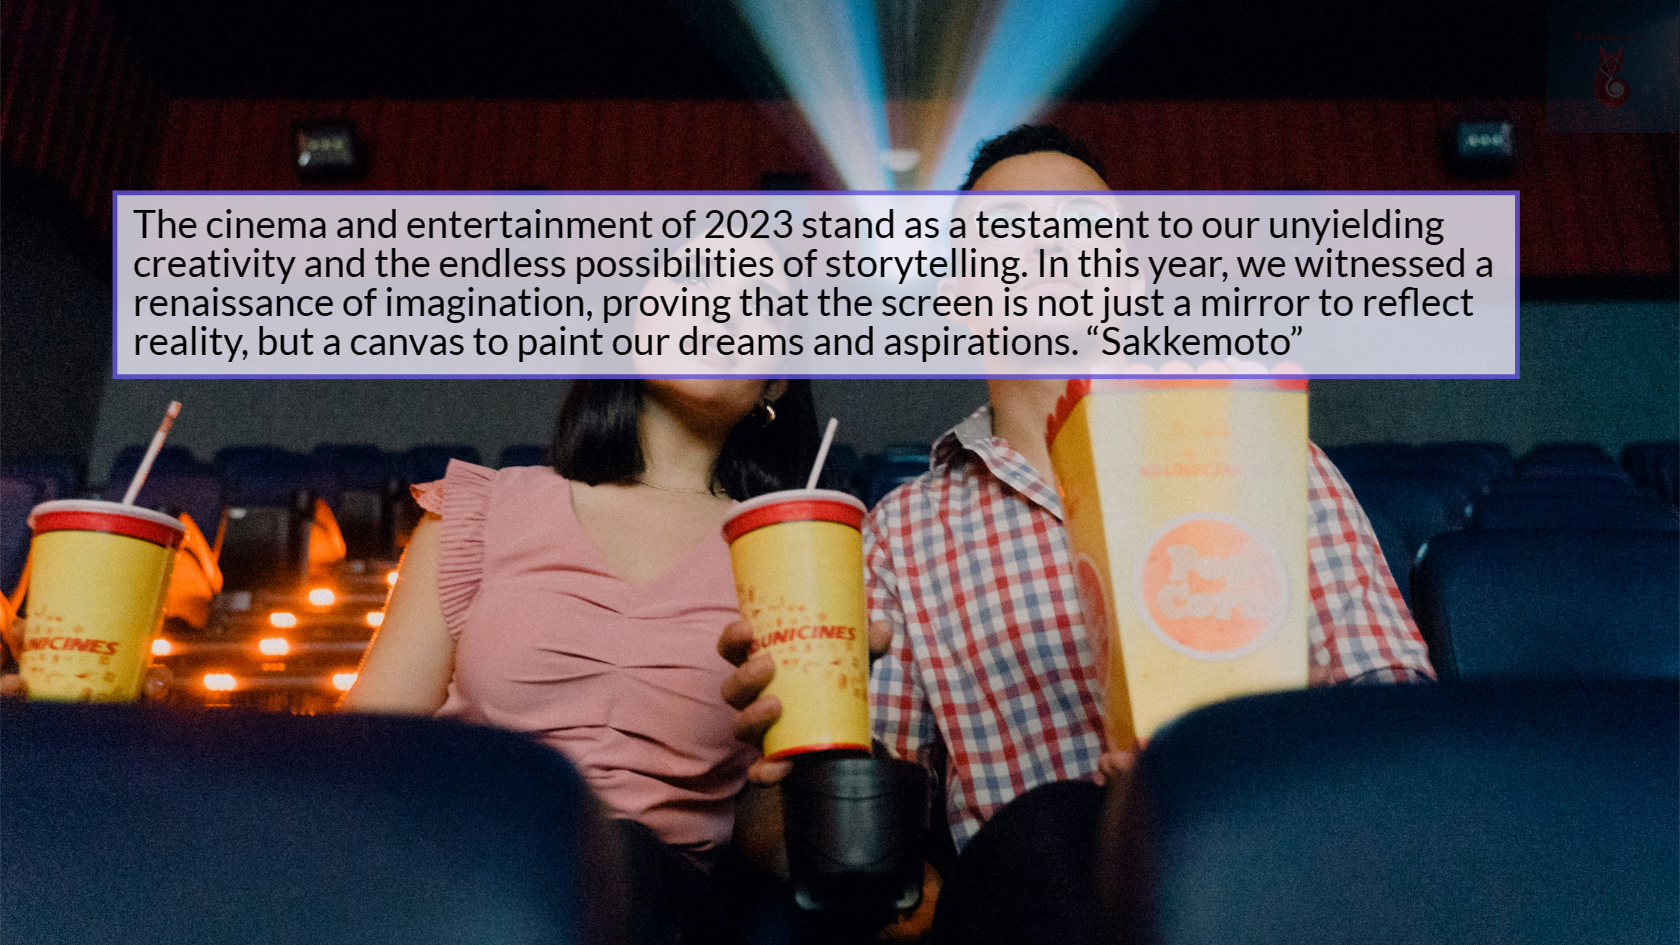 The cinema and entertainment of 2023 stand as a testament to our unyielding creativity